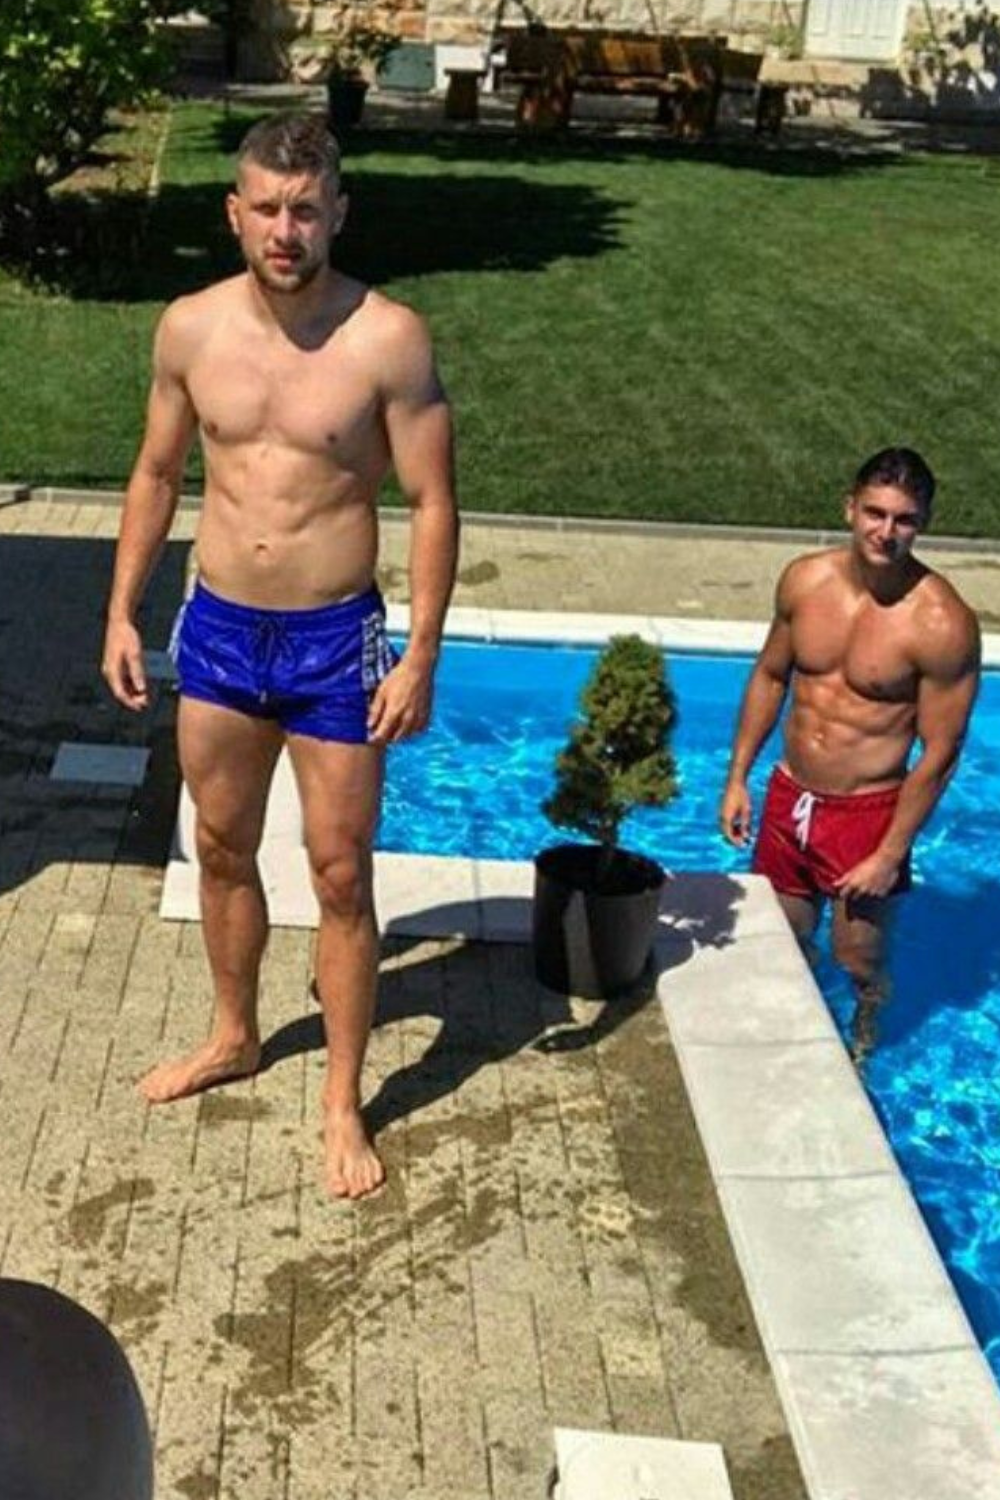 rebic-chilling-by-the-pool-with-his-friend